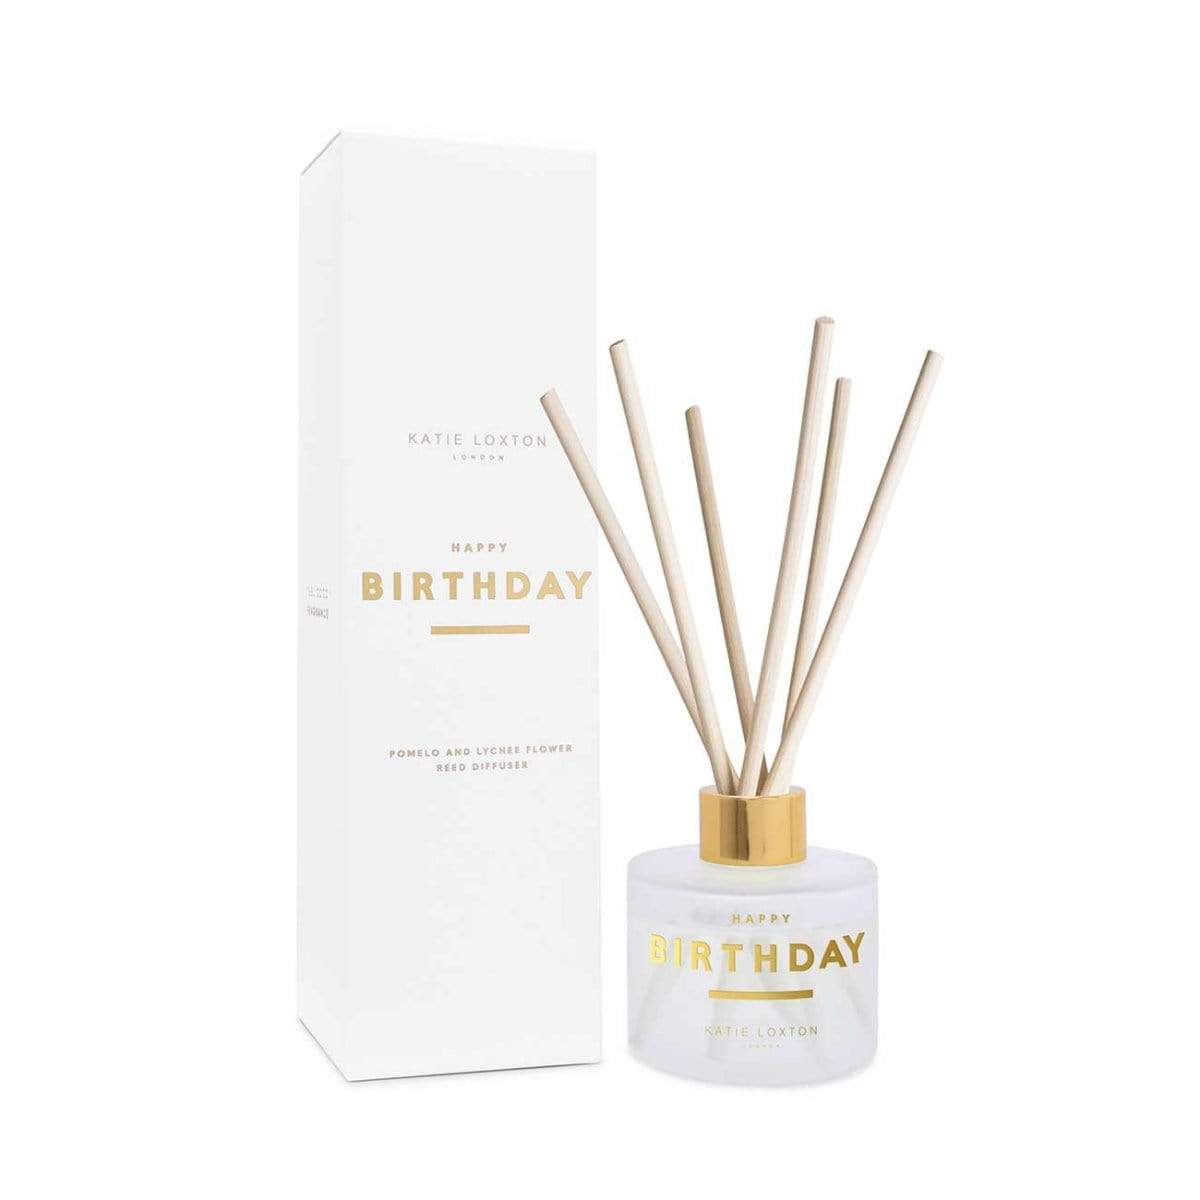 Katie Loxton Reed Diffuser Katie Loxton Sentiment Reed Diffuser - Happy Birthday - Pomelo and Lychee Flower